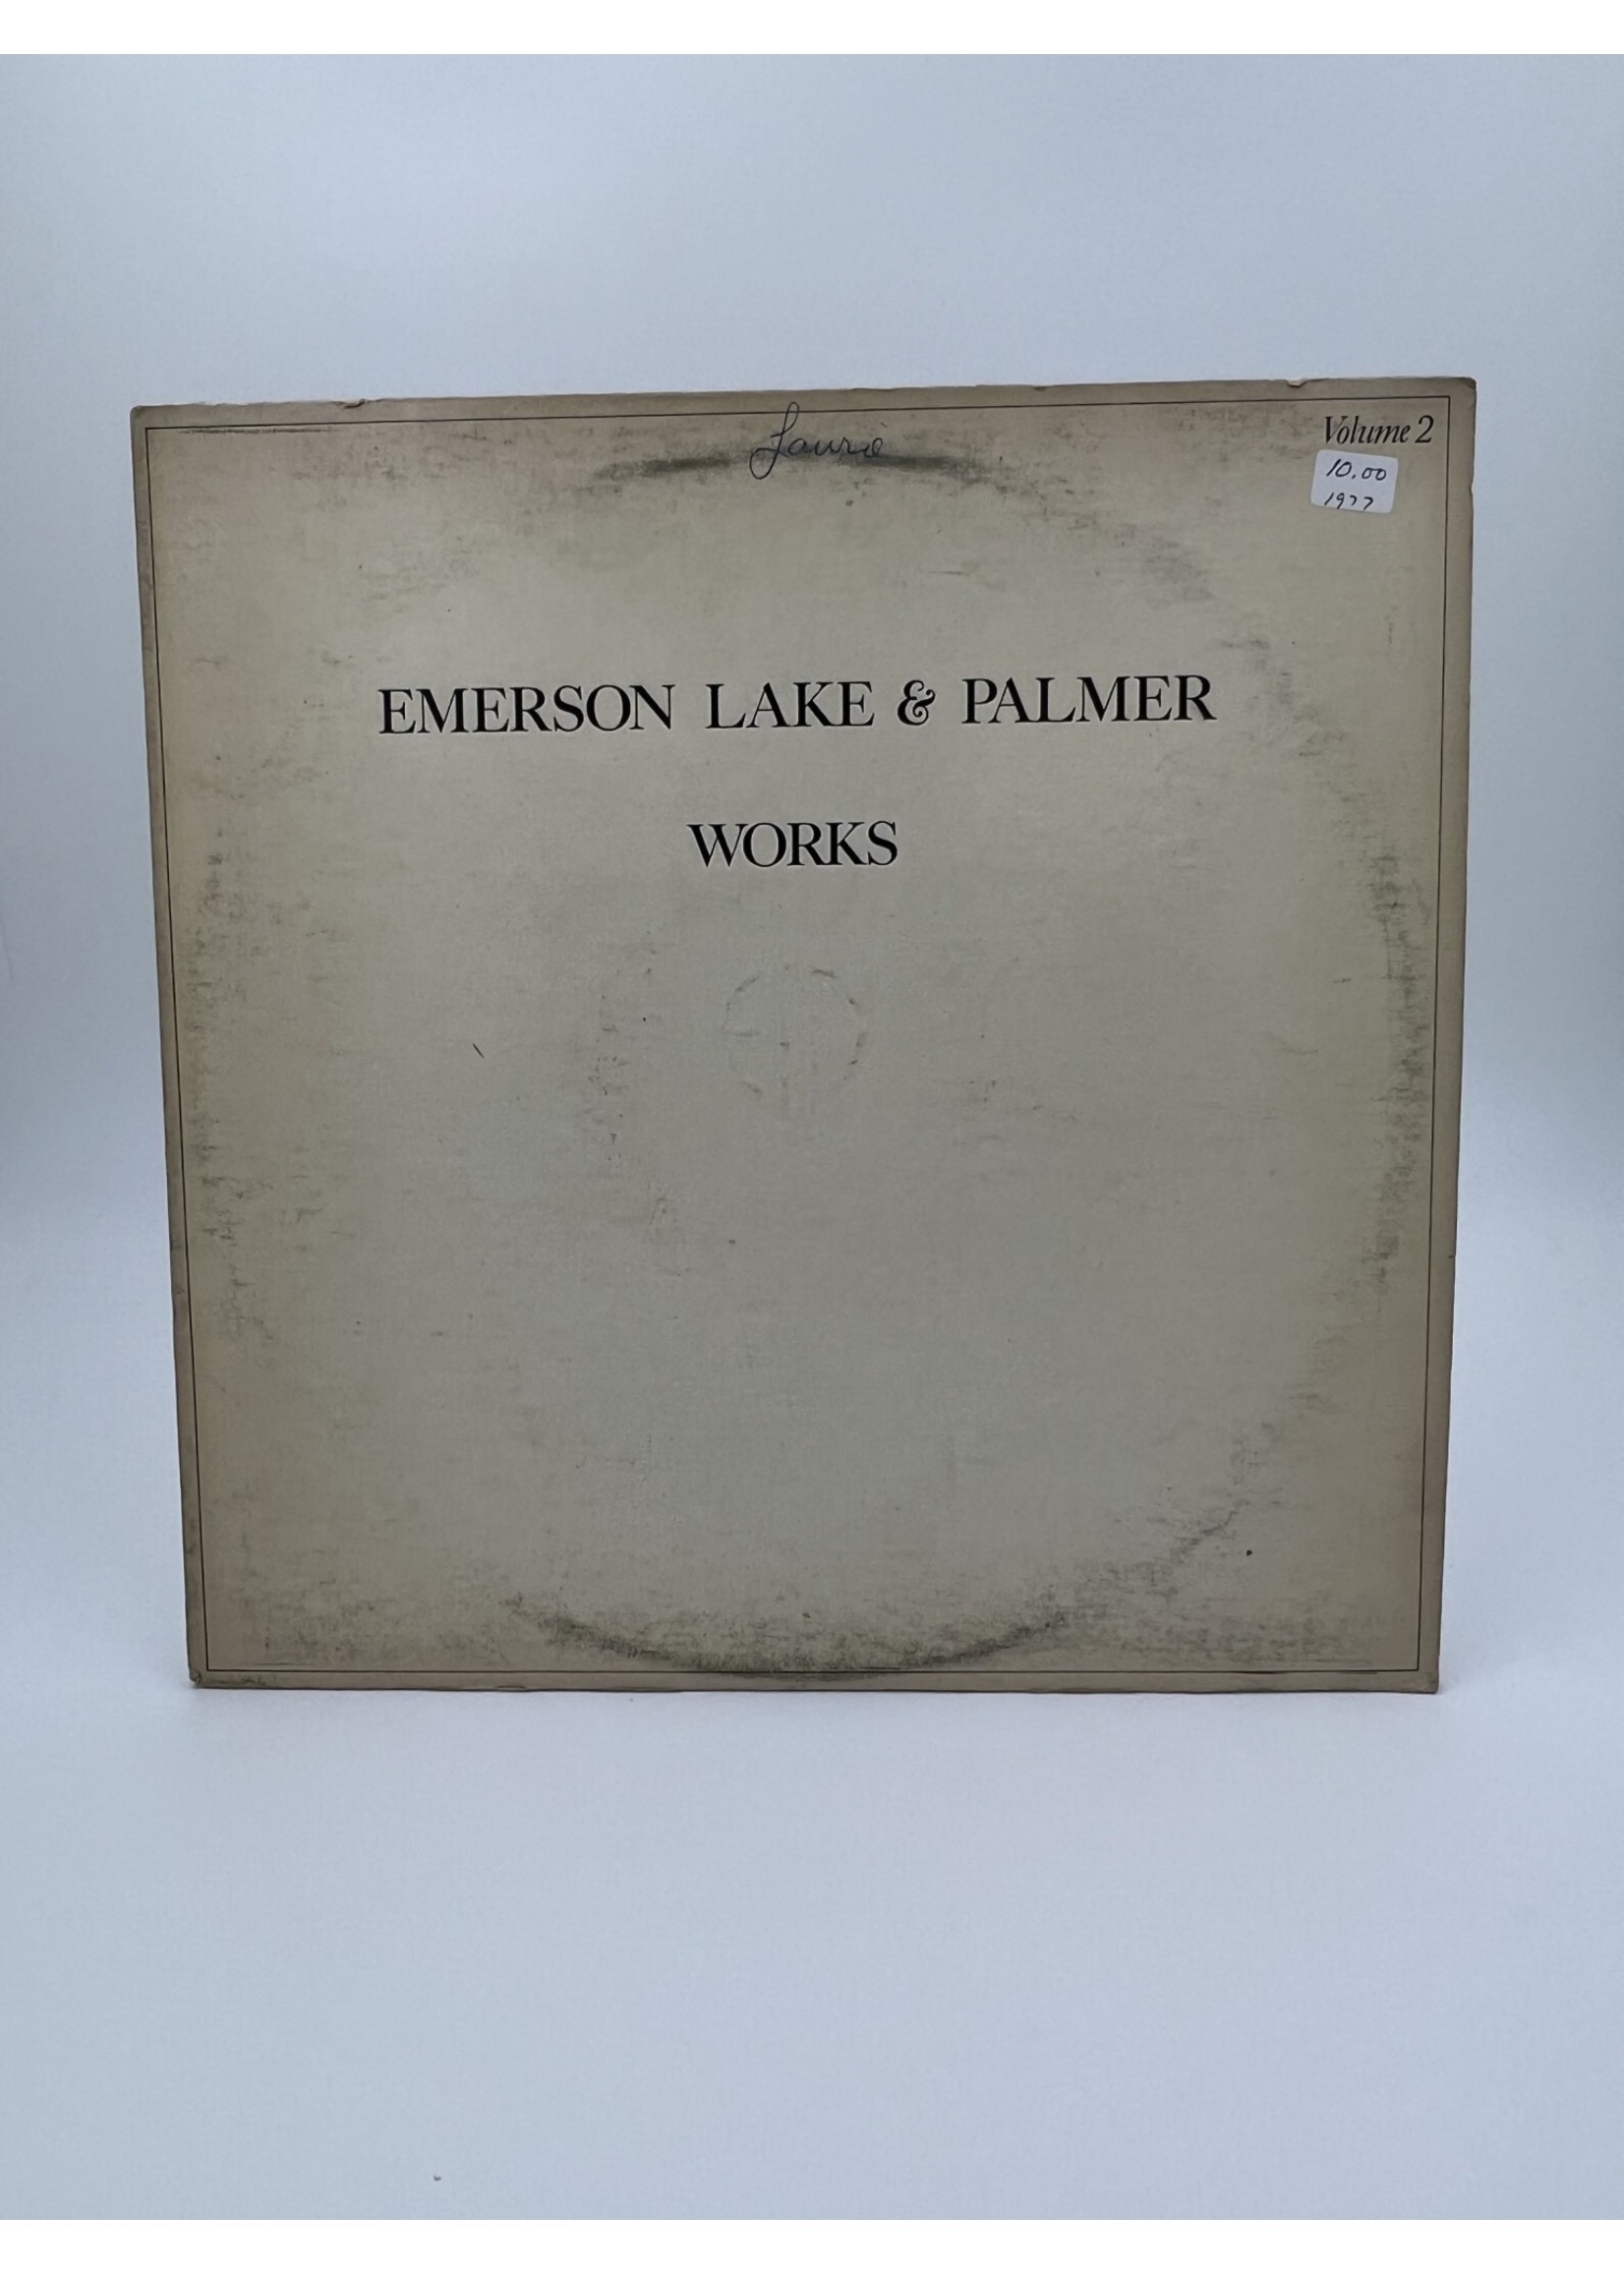 LP Emerson Lake And Palmer Works Volume 2 Lp Record